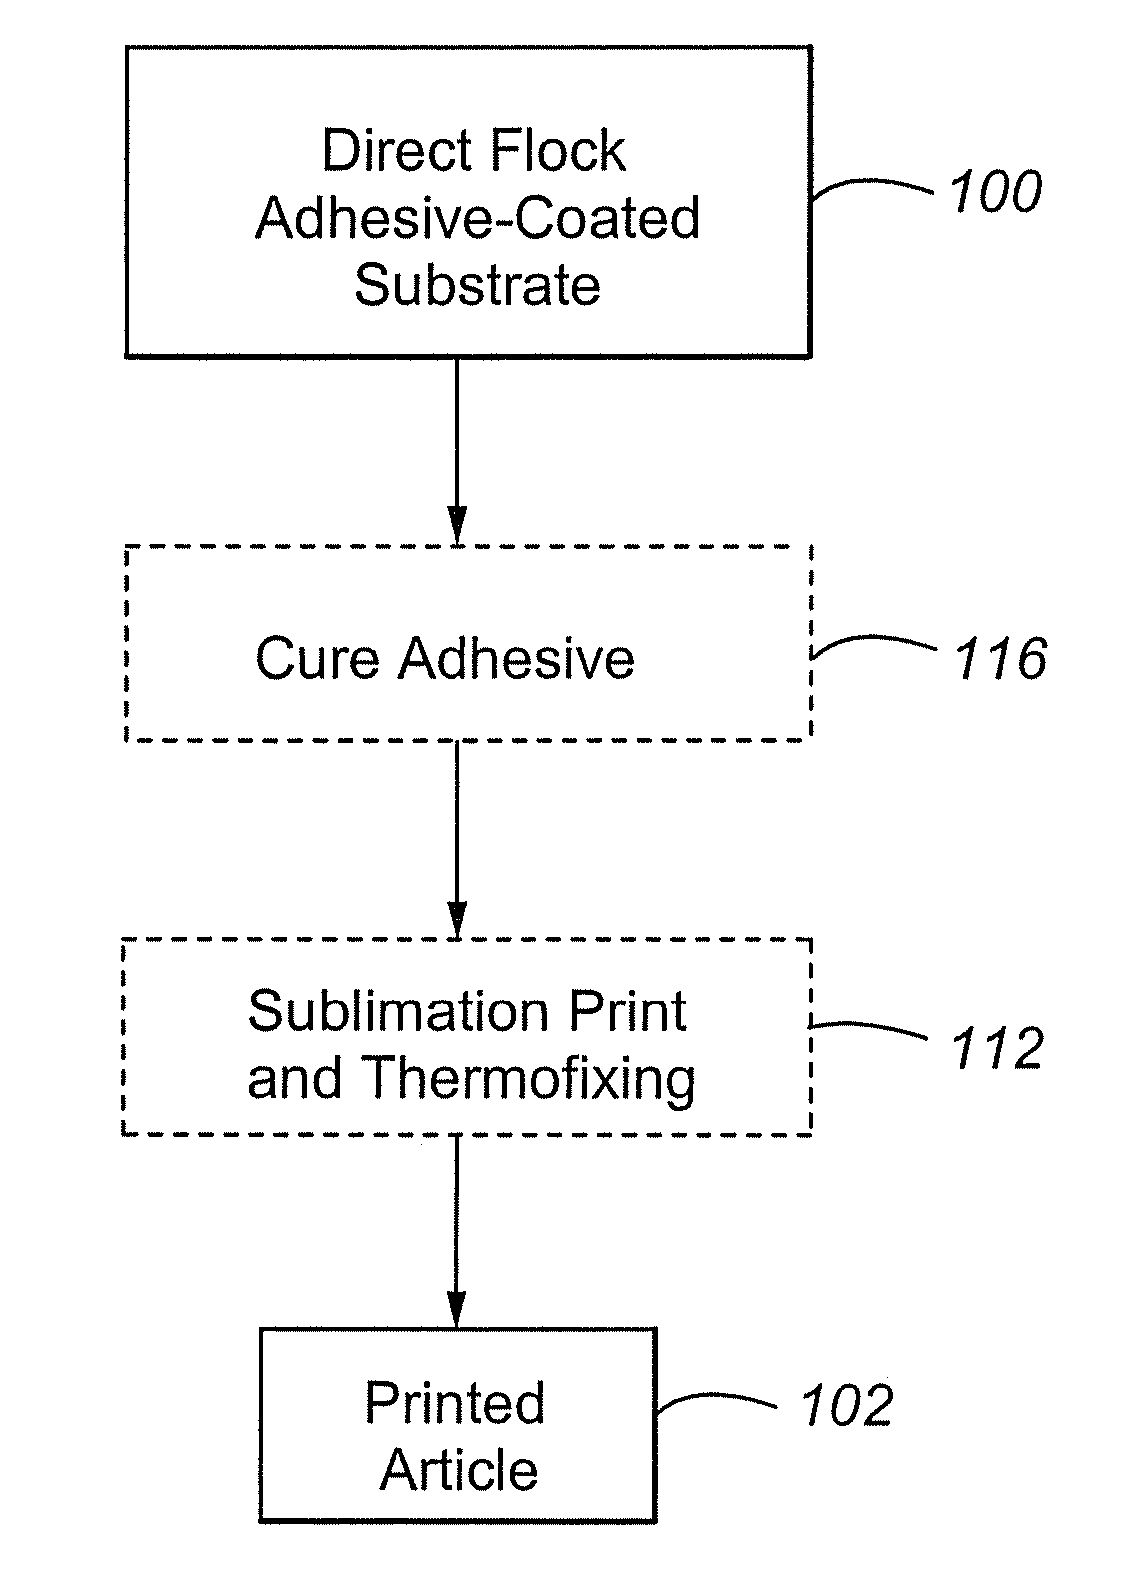 Process for heat setting polyester fibers for sublimation printing